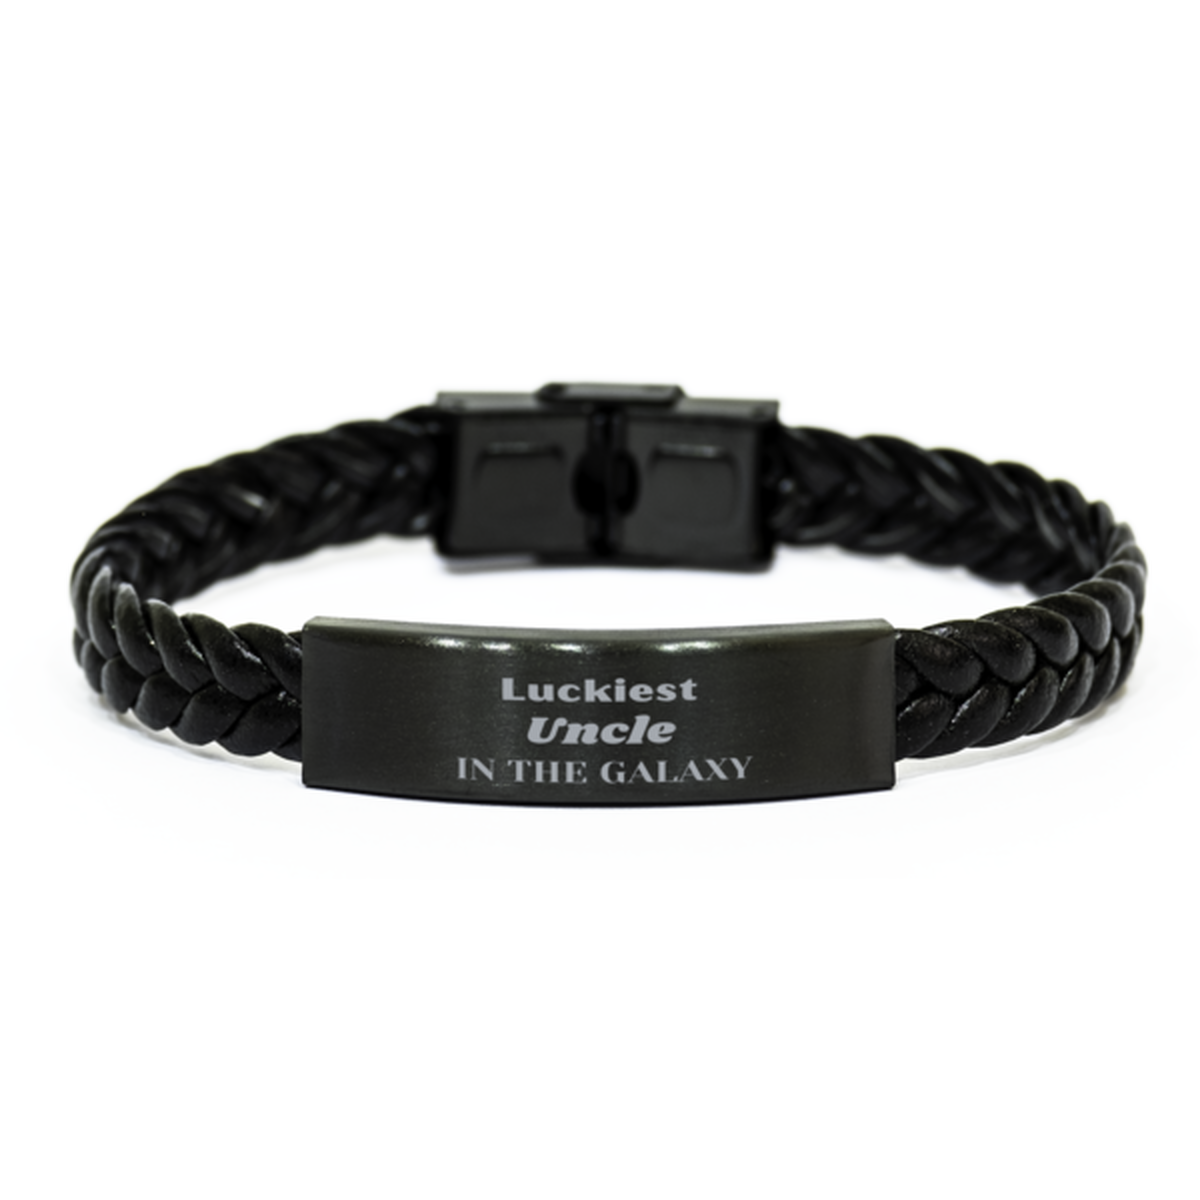 Luckiest Uncle in the Galaxy, To My Uncle Engraved Gifts, Christmas Uncle Braided Leather Bracelet Gifts, X-mas Birthday Unique Gifts For Uncle Men Women